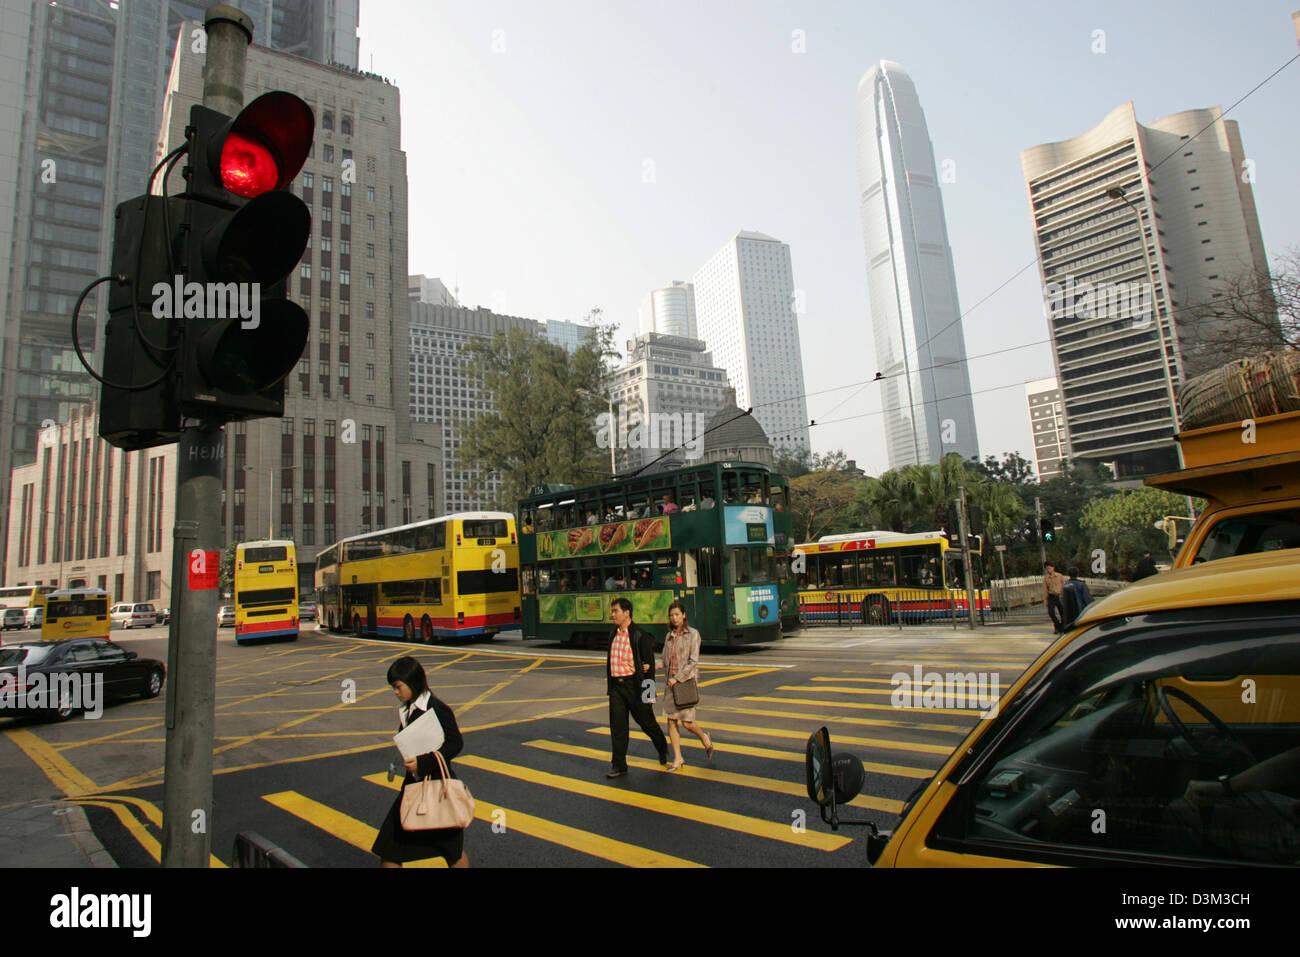 (dpa files) - Pedestrians walk across a zebra crossing in Hong Kong, China, 28 October 2004. The high rise (2nd from R) is the so-called International Finance Centre, which marks with a hight of 415 metres the tallest building of the city. Hong Kong, which has a population of 7,5 million, had been under British administration until it became the Hong Kong Special Administrative Reg Stock Photo